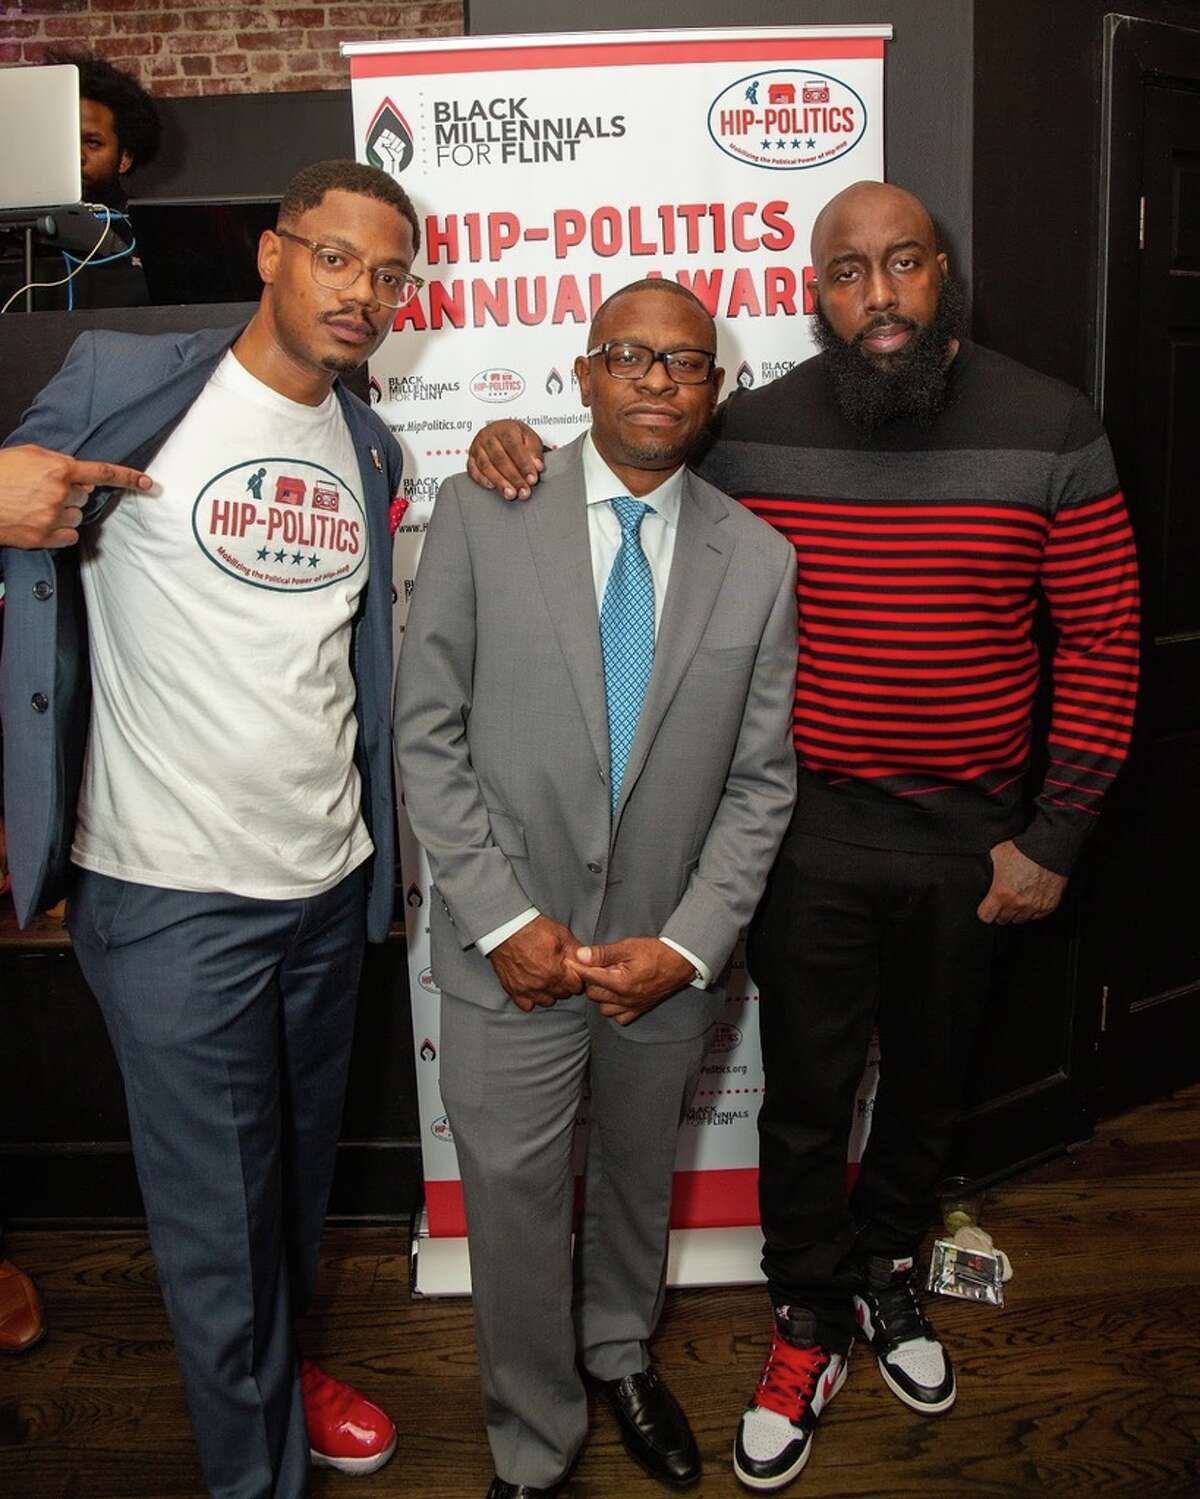 Houston's Trae Tha Truth and Scarface were honored at the Congressional Black Caucus annual conference in Washington DC for their community activism and political work